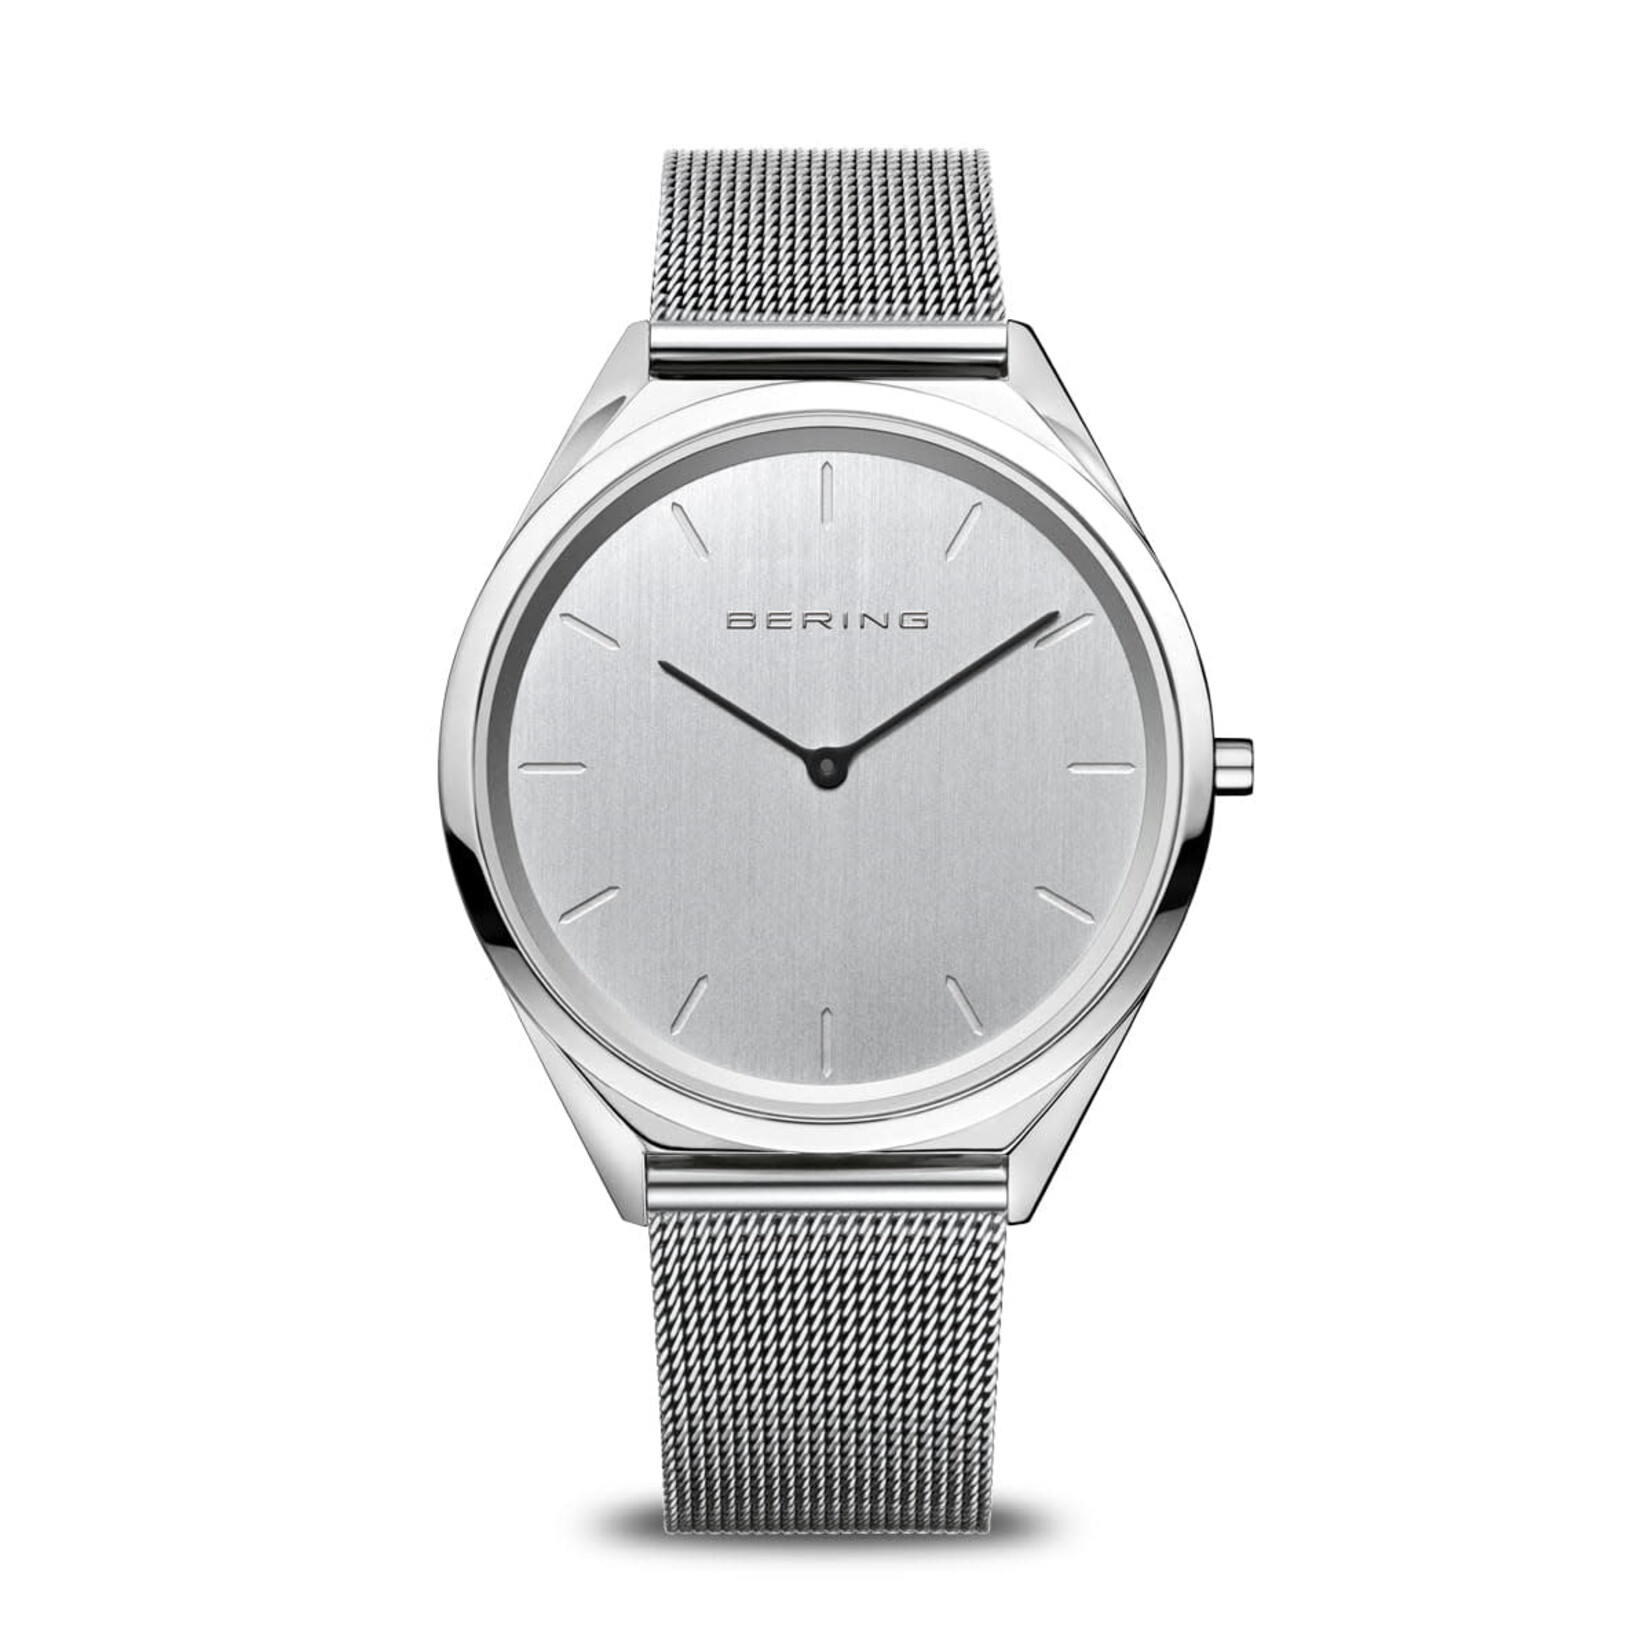 Bering Large Face All Silver Watch